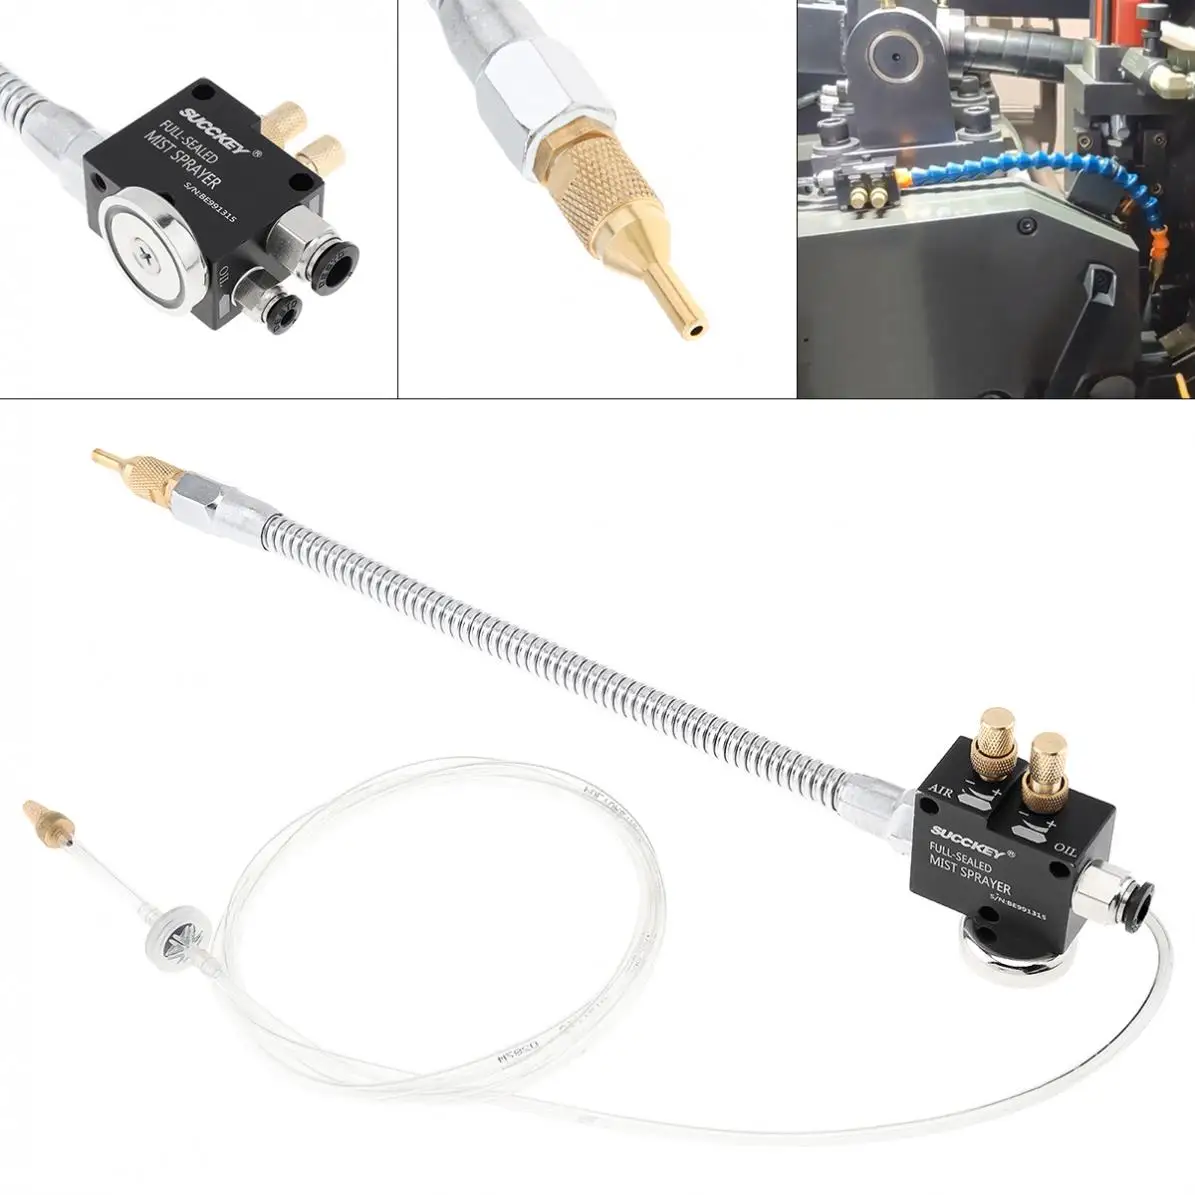 

Precision Mist Coolant Lubrication Spray System with Adsorbable Magnetic Base for Metal Cutting Engraving Cooling Machine